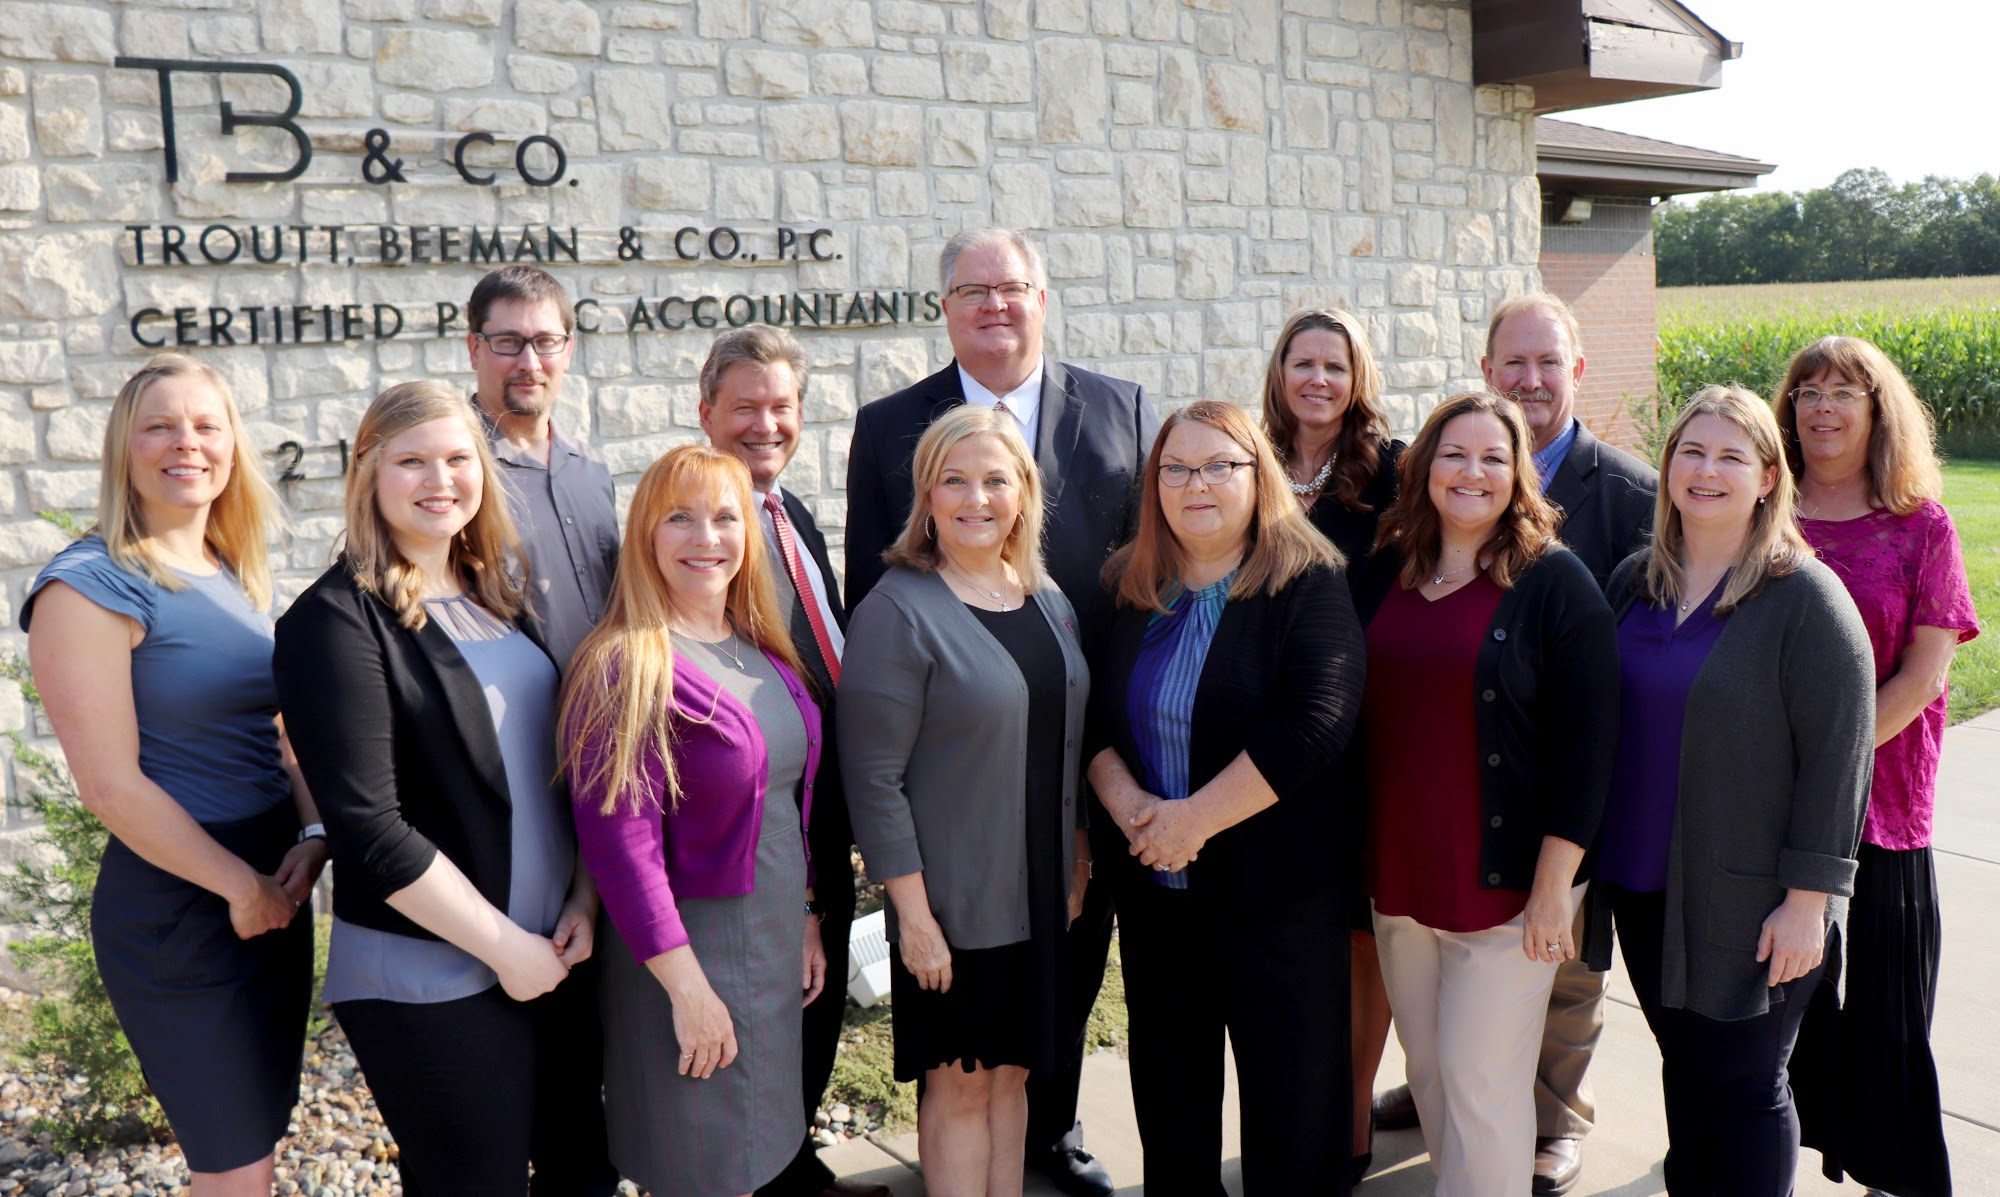 Troutt Beeman & Co., P.C. CPAs and Business Advisors